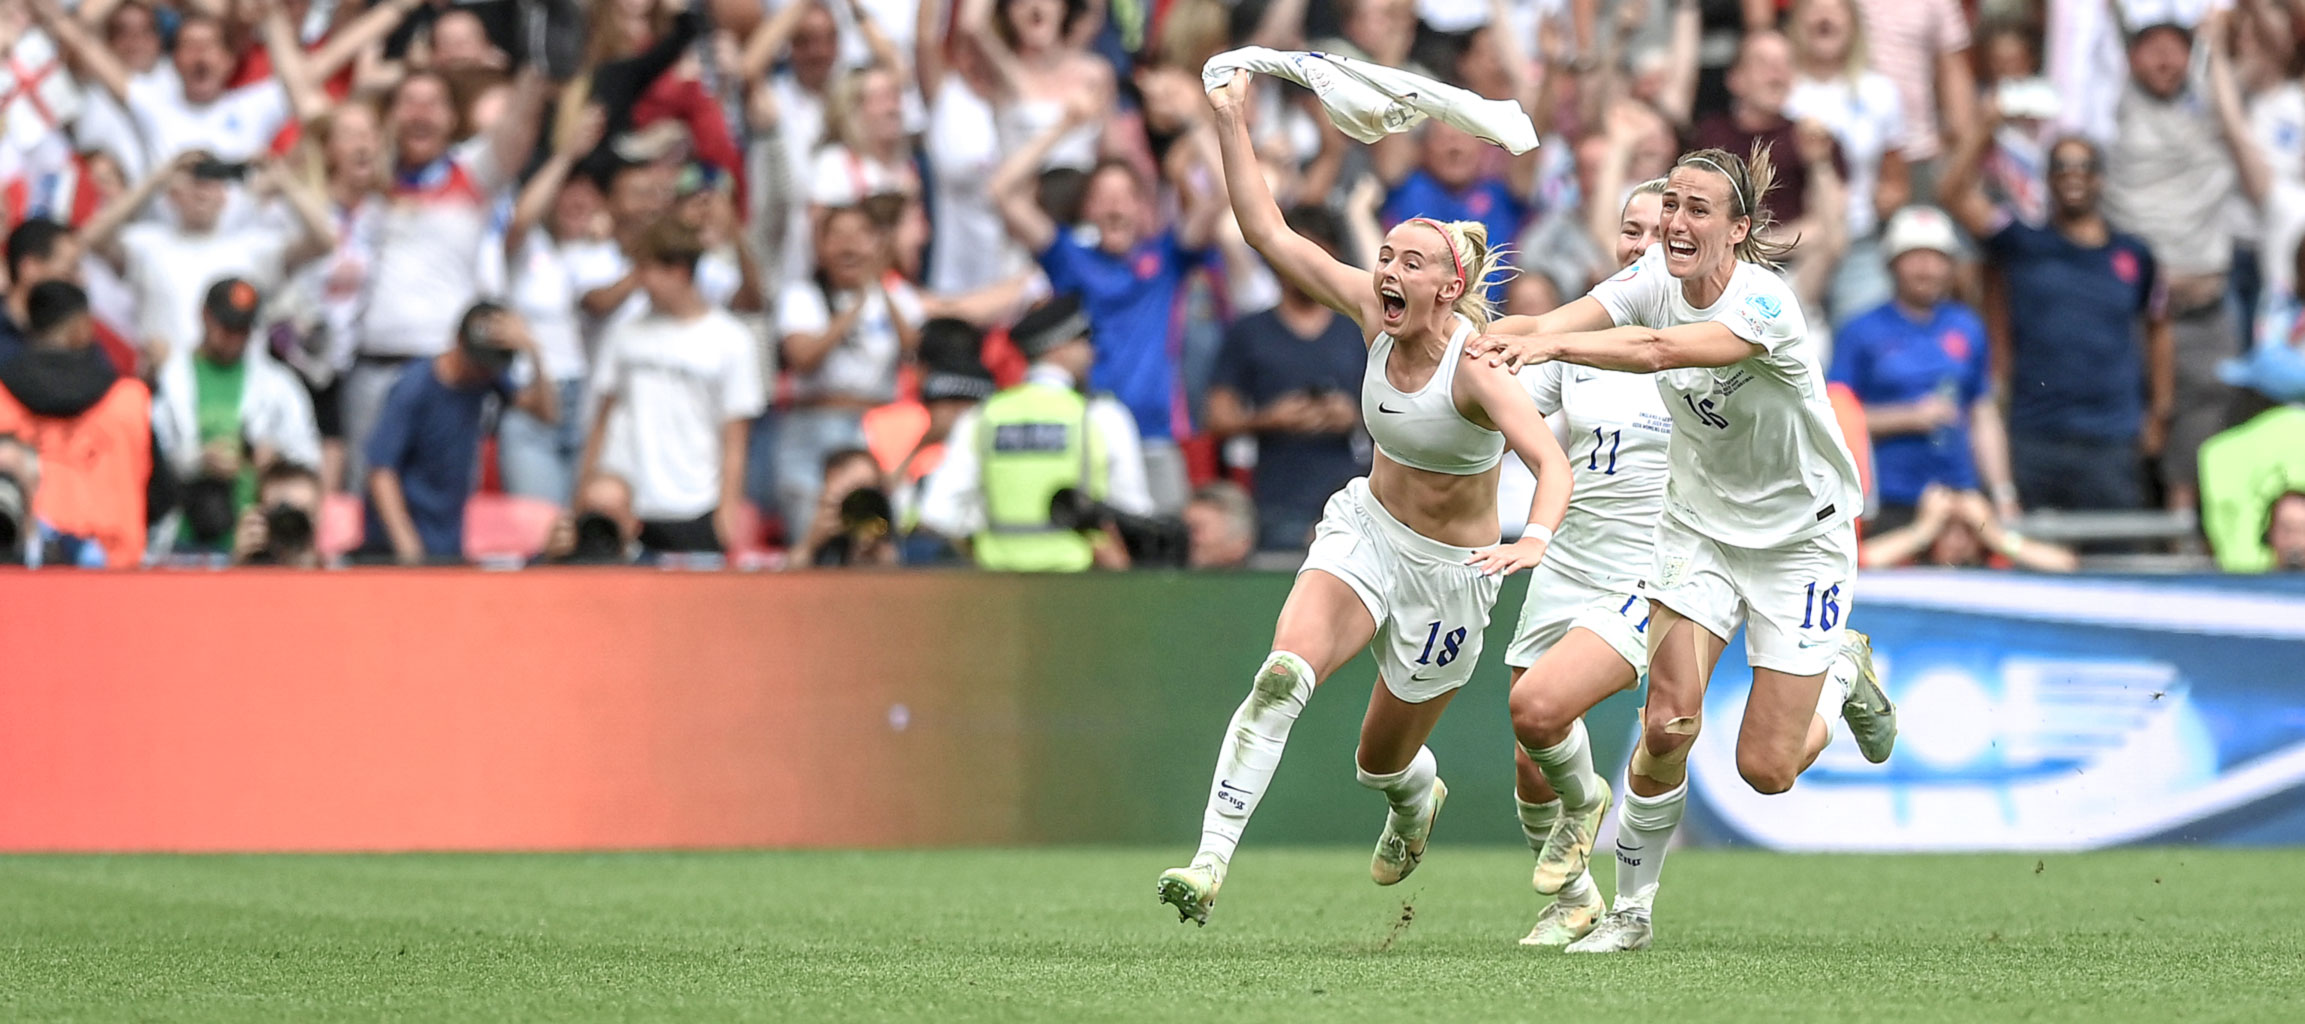 England 2 Germany 1 (aet): Women’s Euro 2022 final tactical analysis